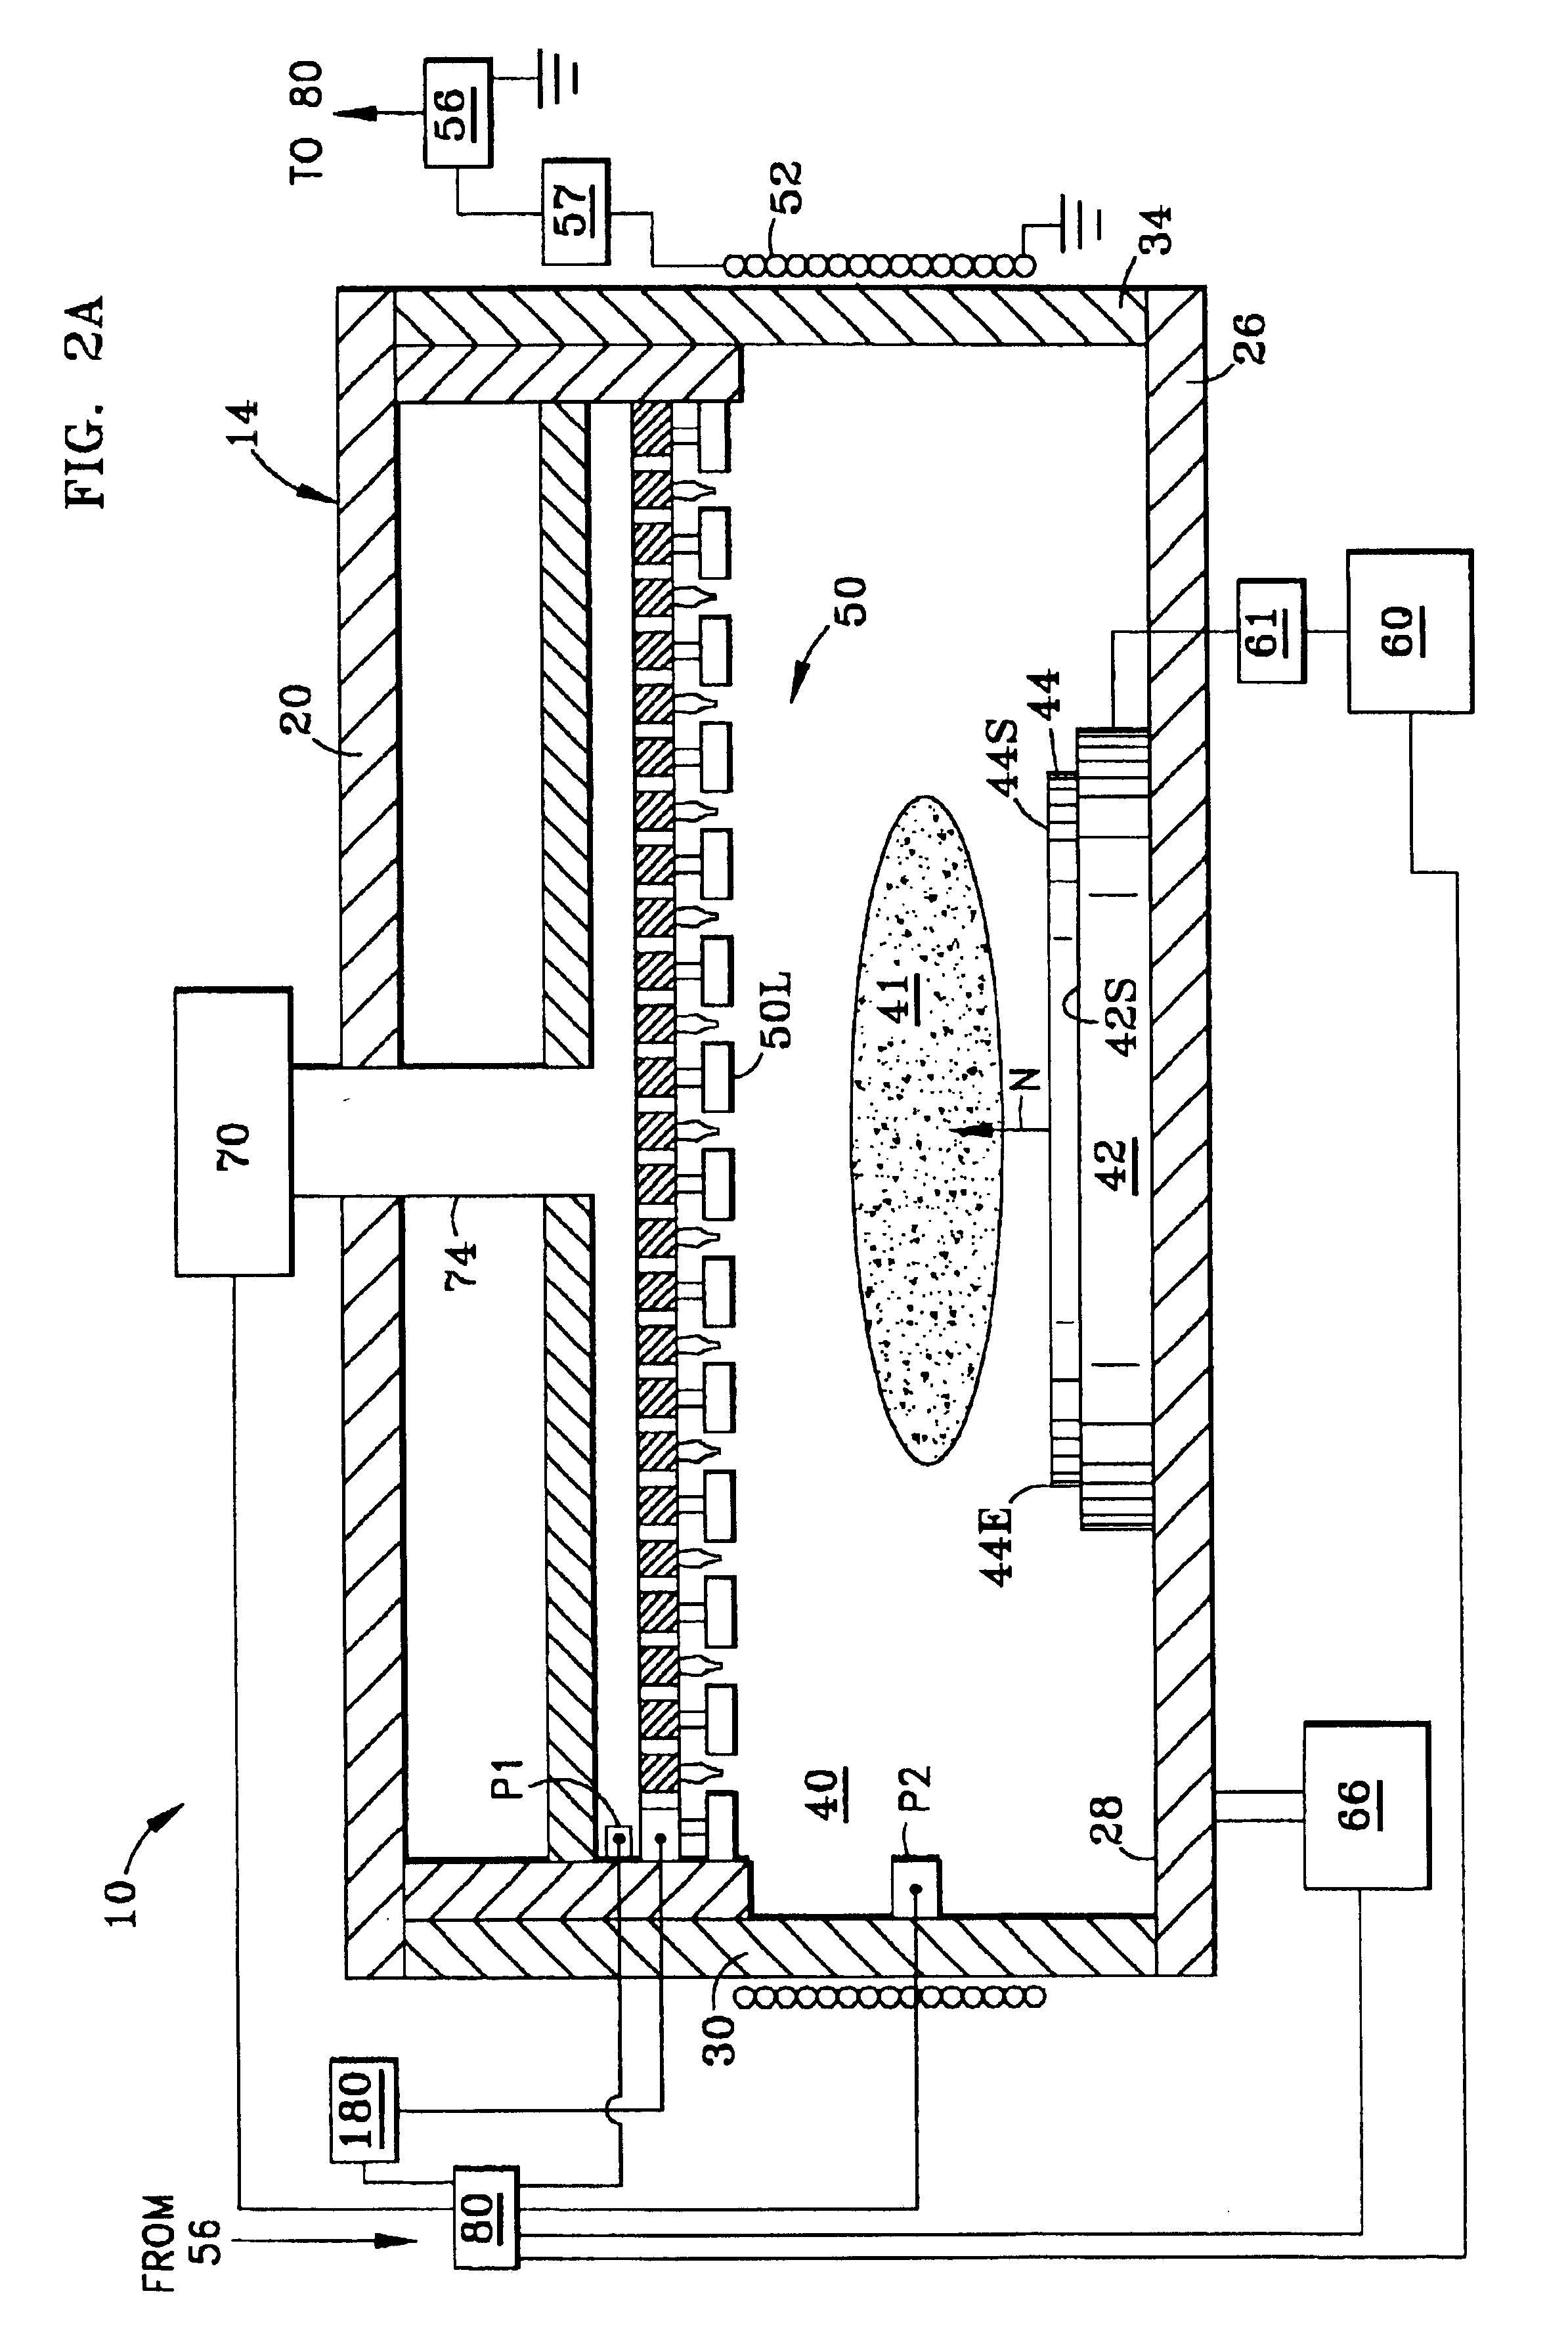 Method of and apparatus for tunable gas injection in a plasma processing system